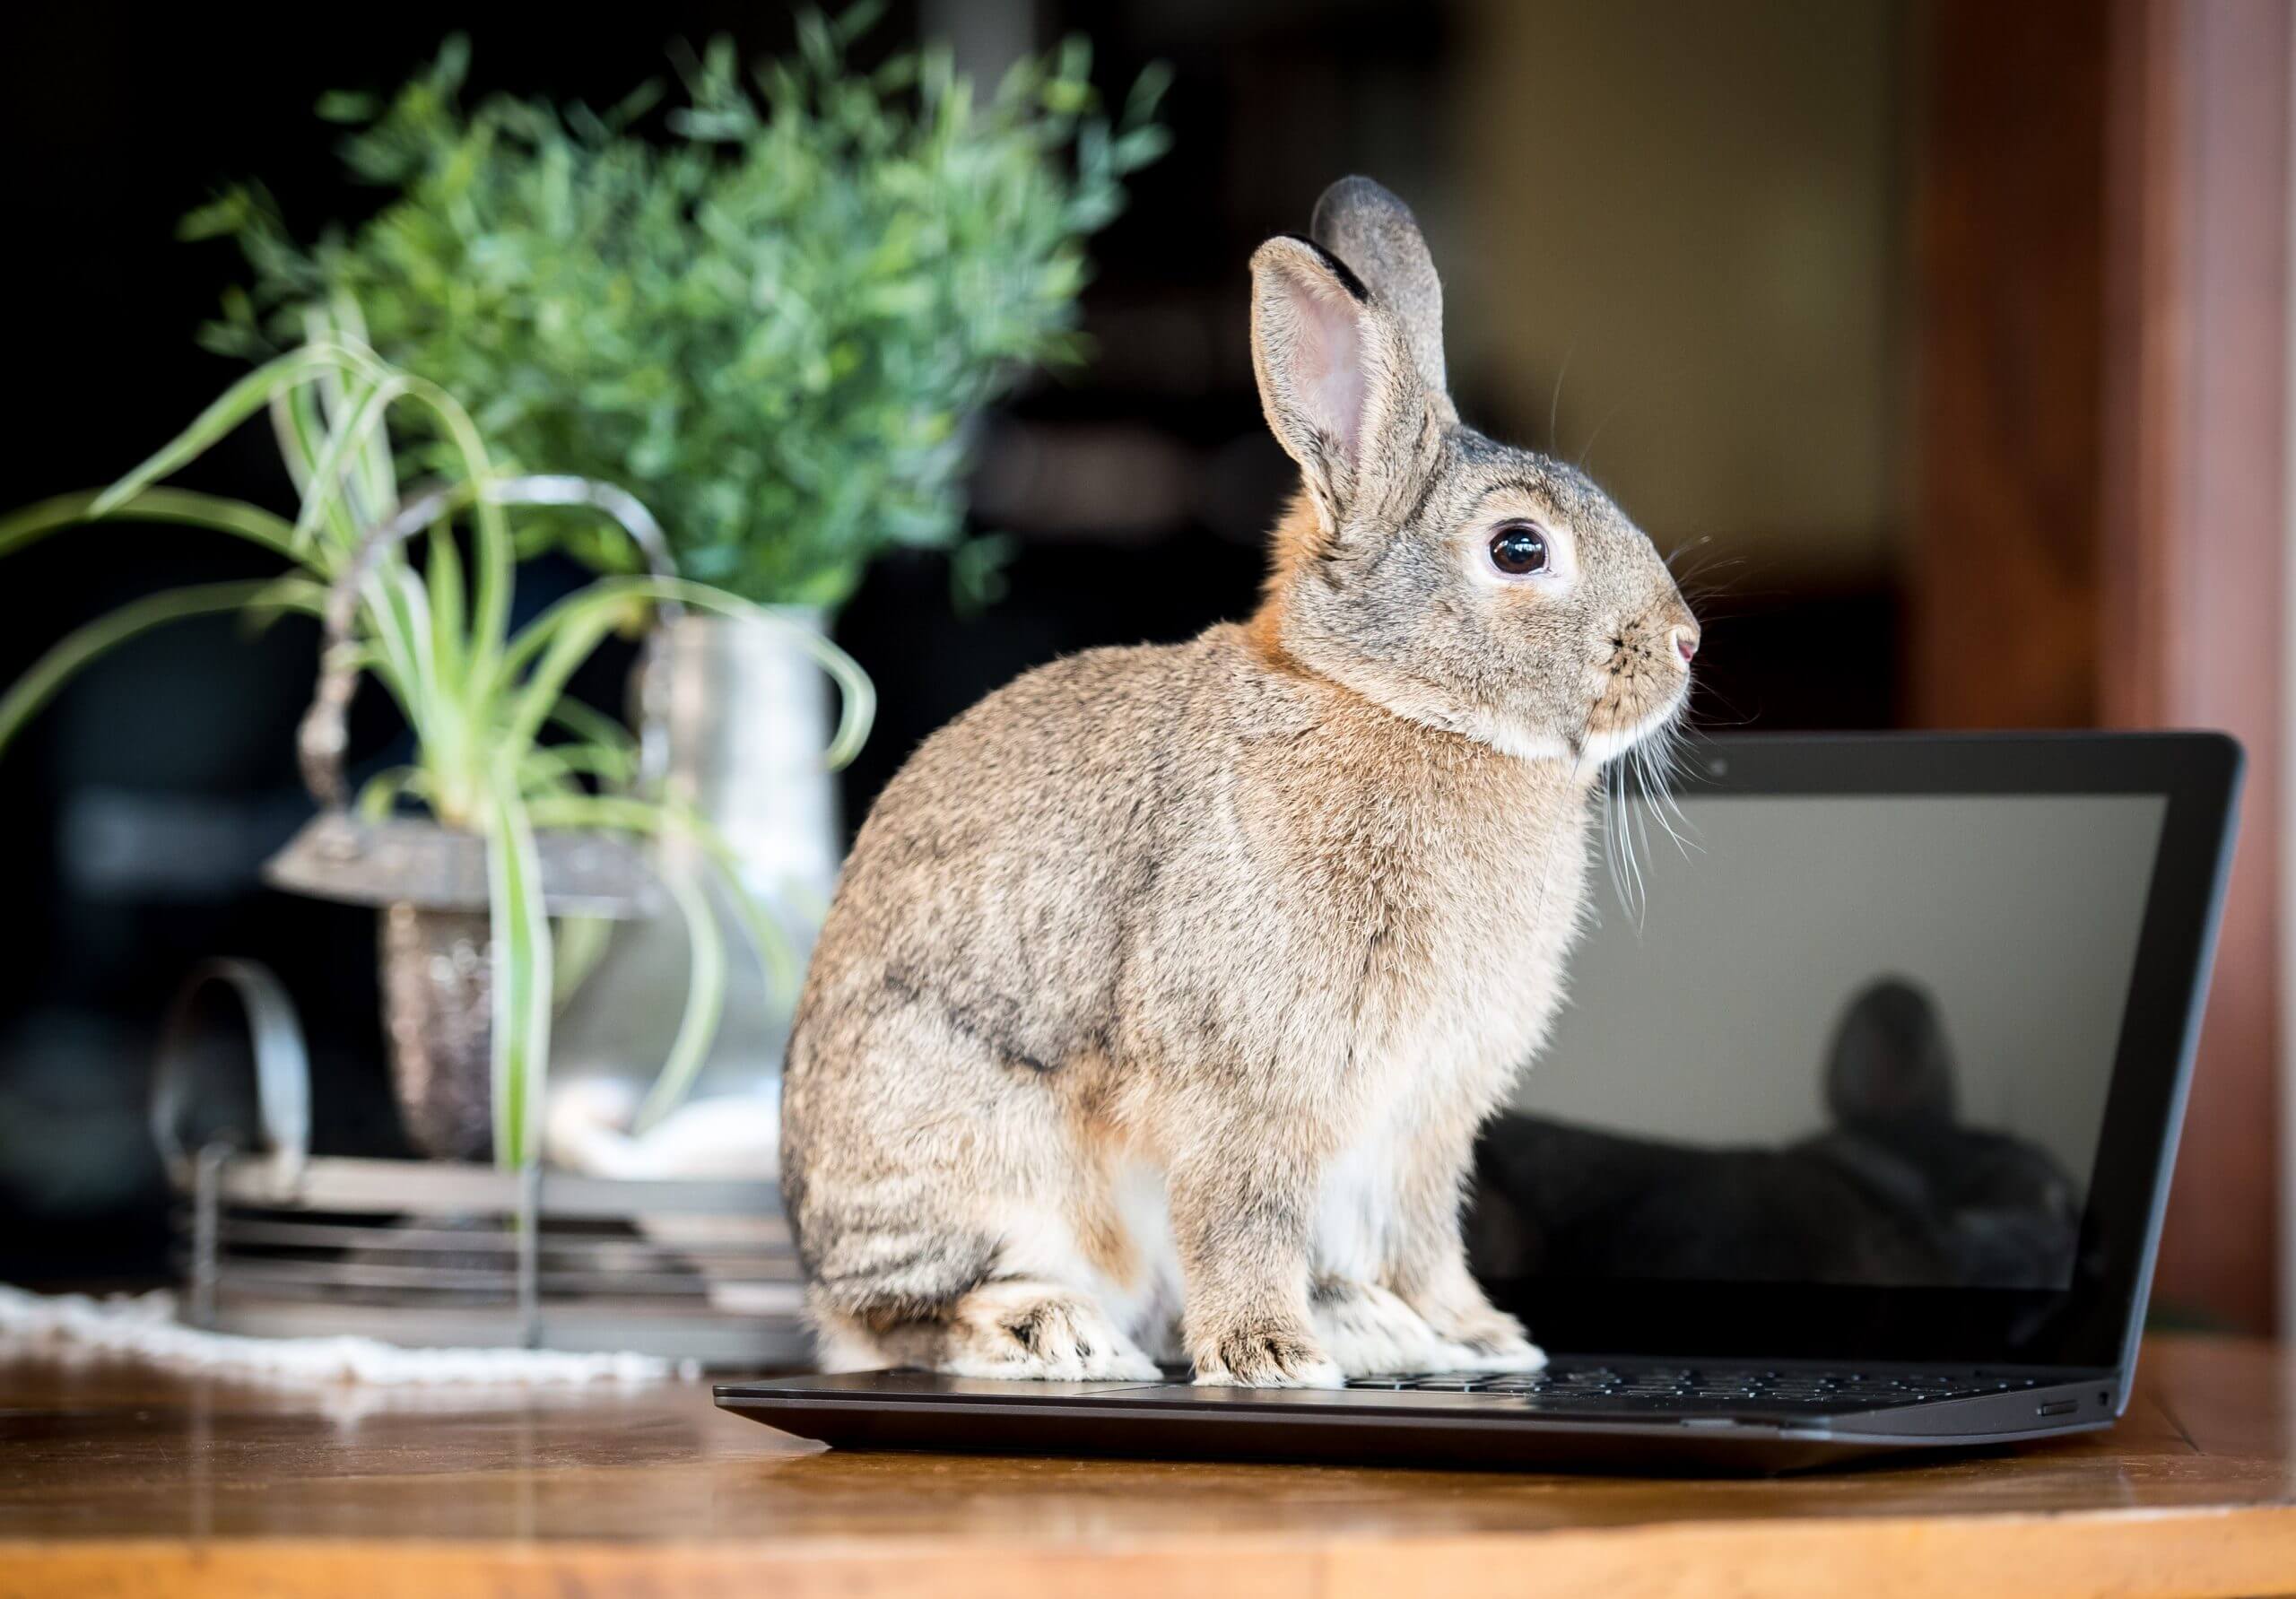 A rabbit sits on the keyboard of a laptop.